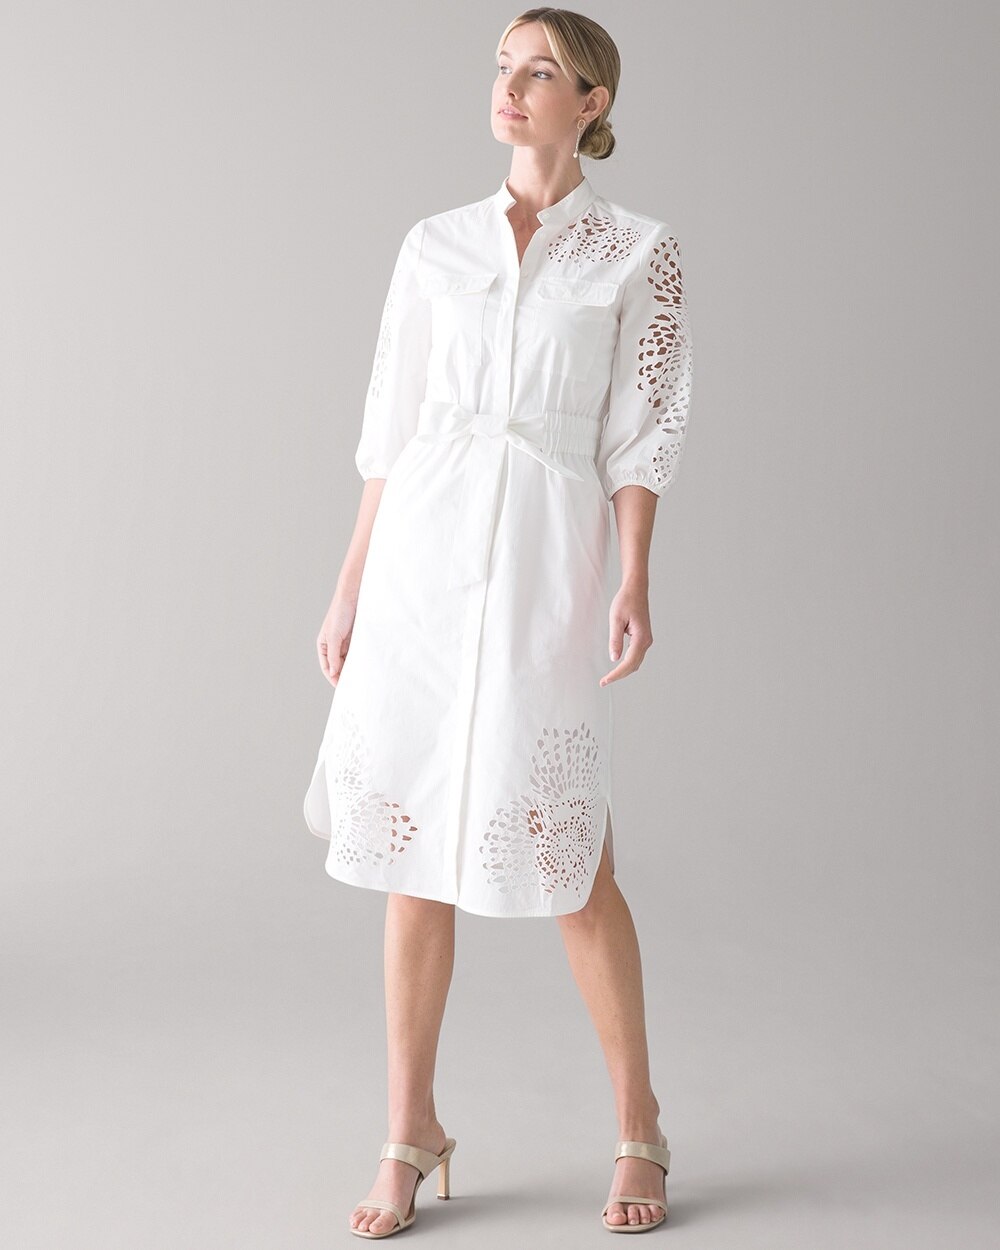 White Poplin Shirtdress video preview image, click to start video